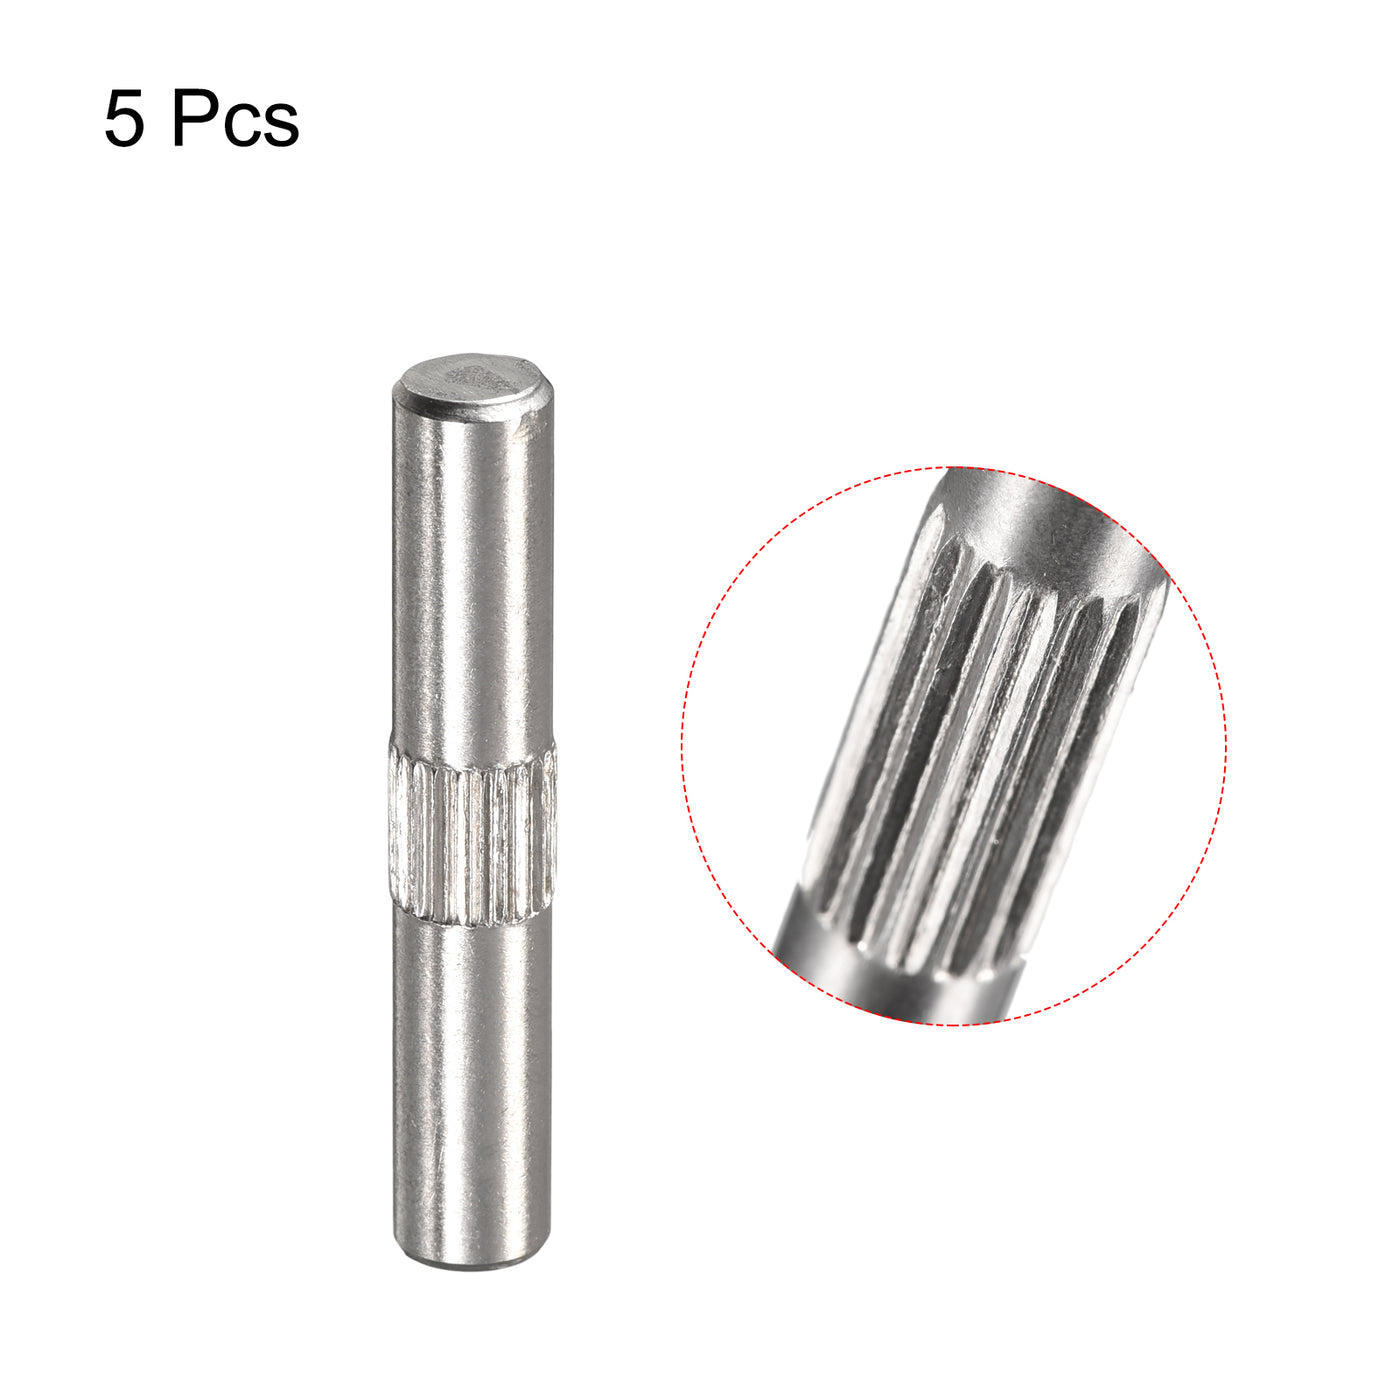 uxcell Uxcell 5x30mm 304 Stainless Steel Dowel Pins, 5Pcs Center Knurled Chamfered End Pin